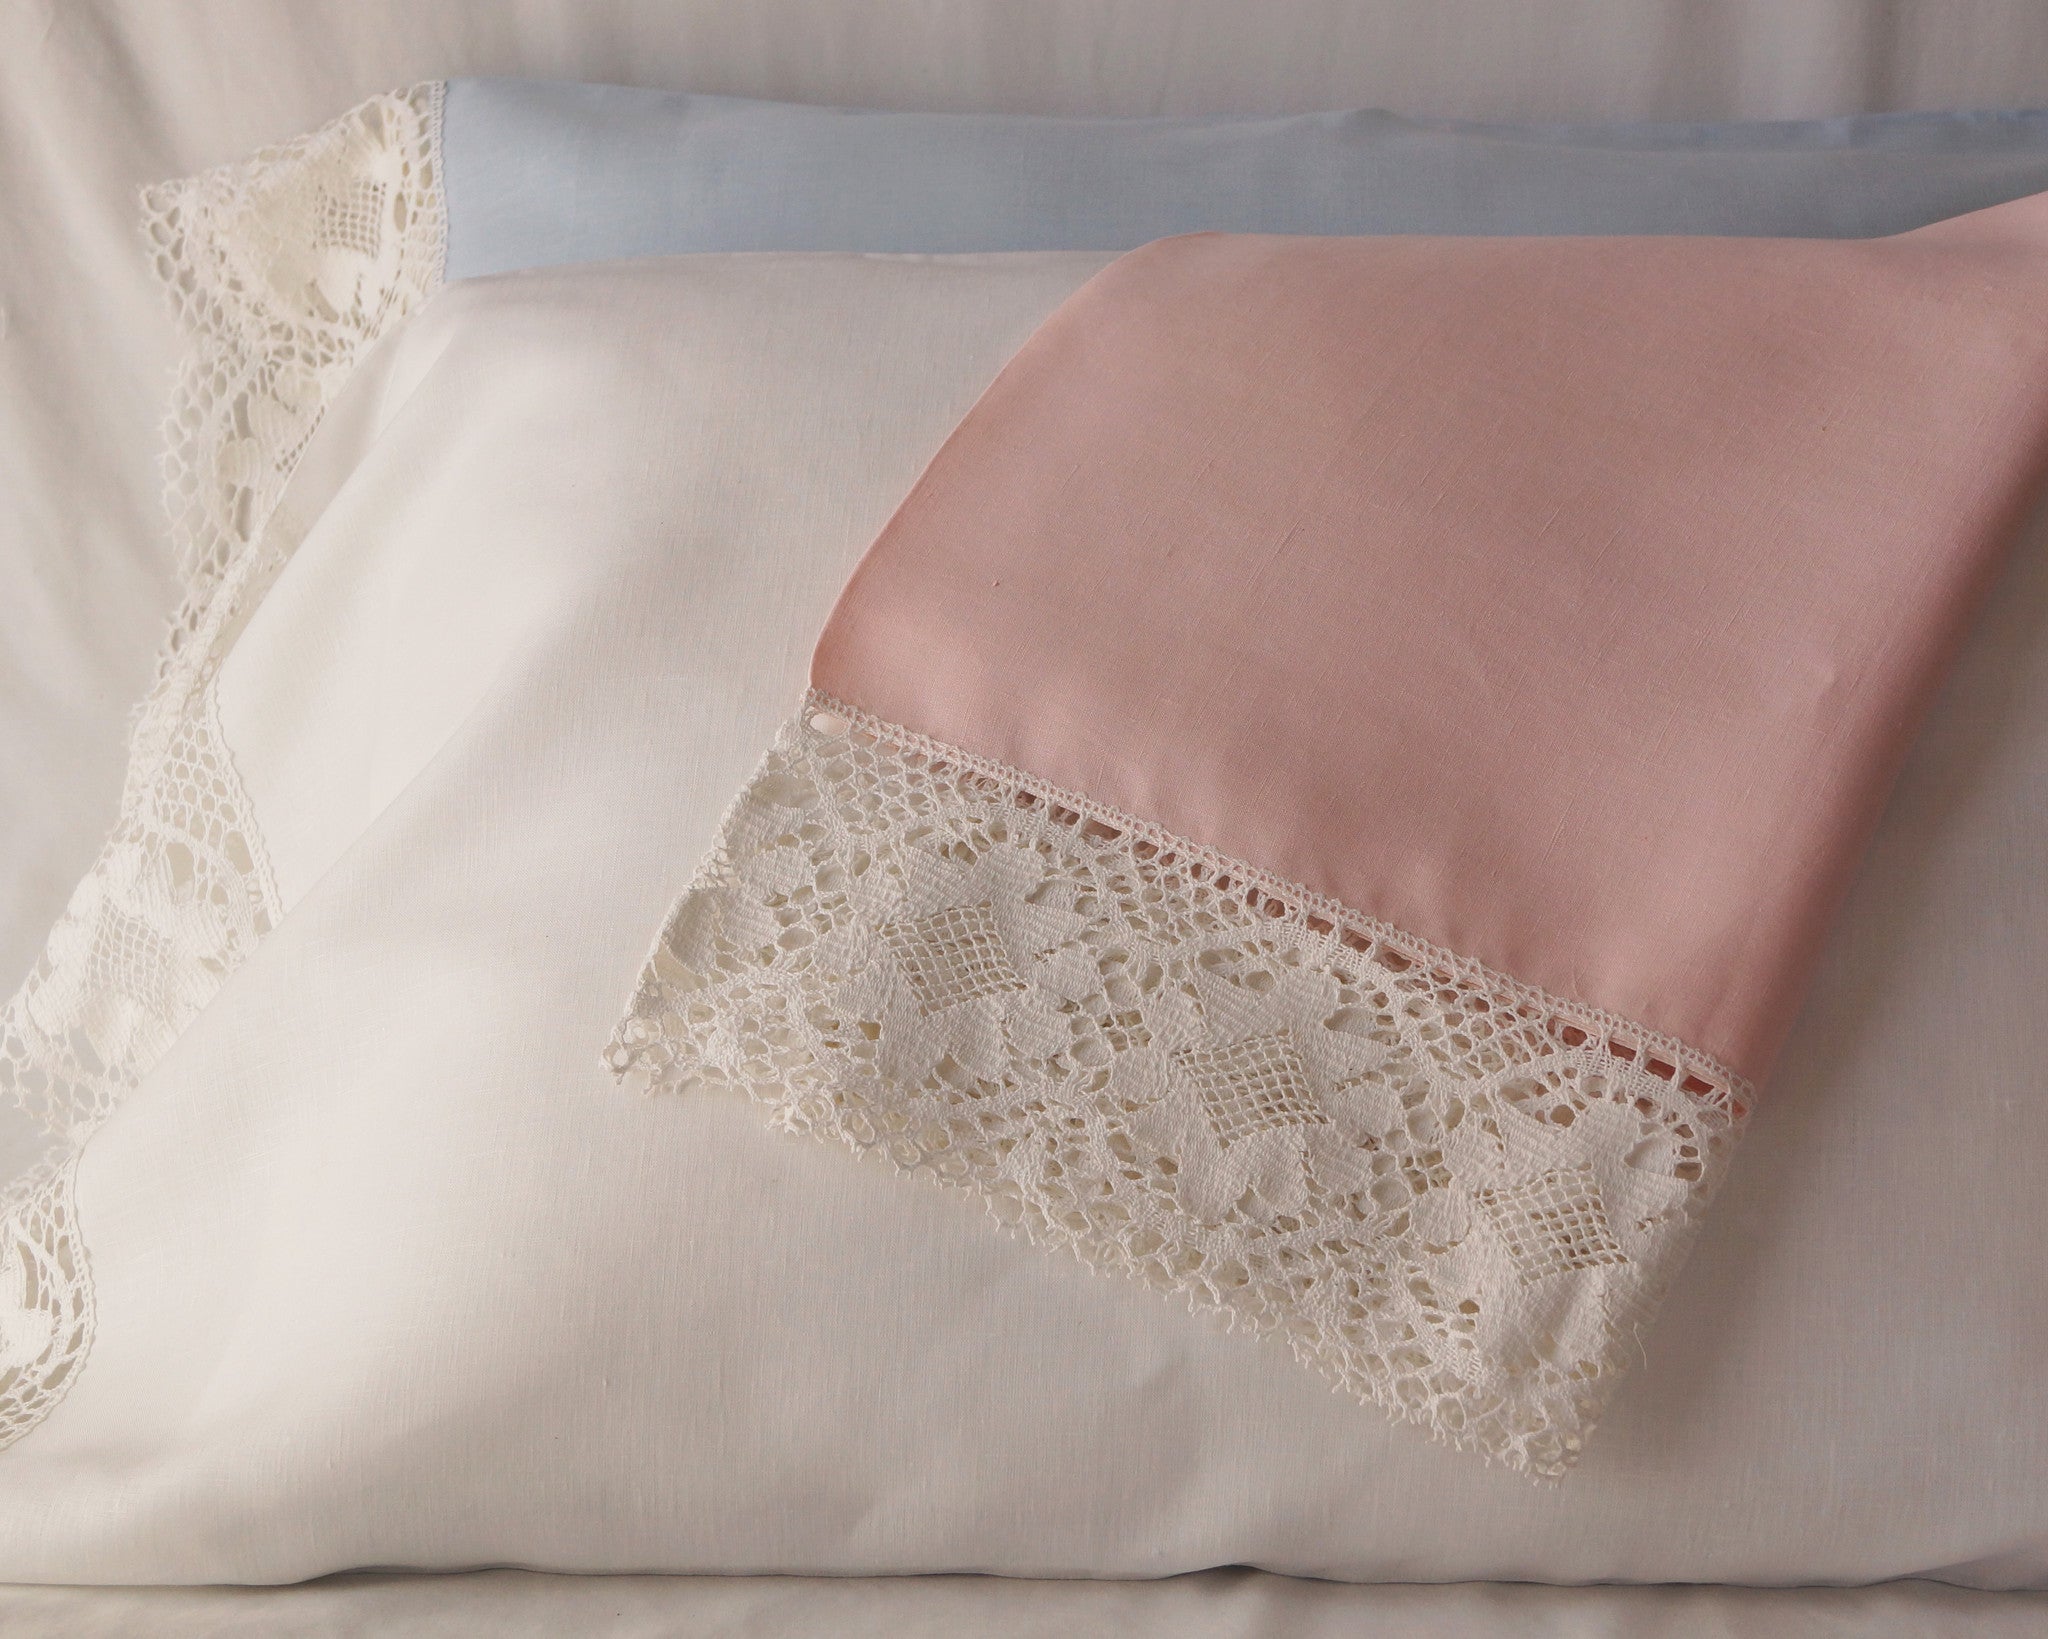 Linen pillow case with 4" cluny lace edge. In white, pink or blue, with white lace.